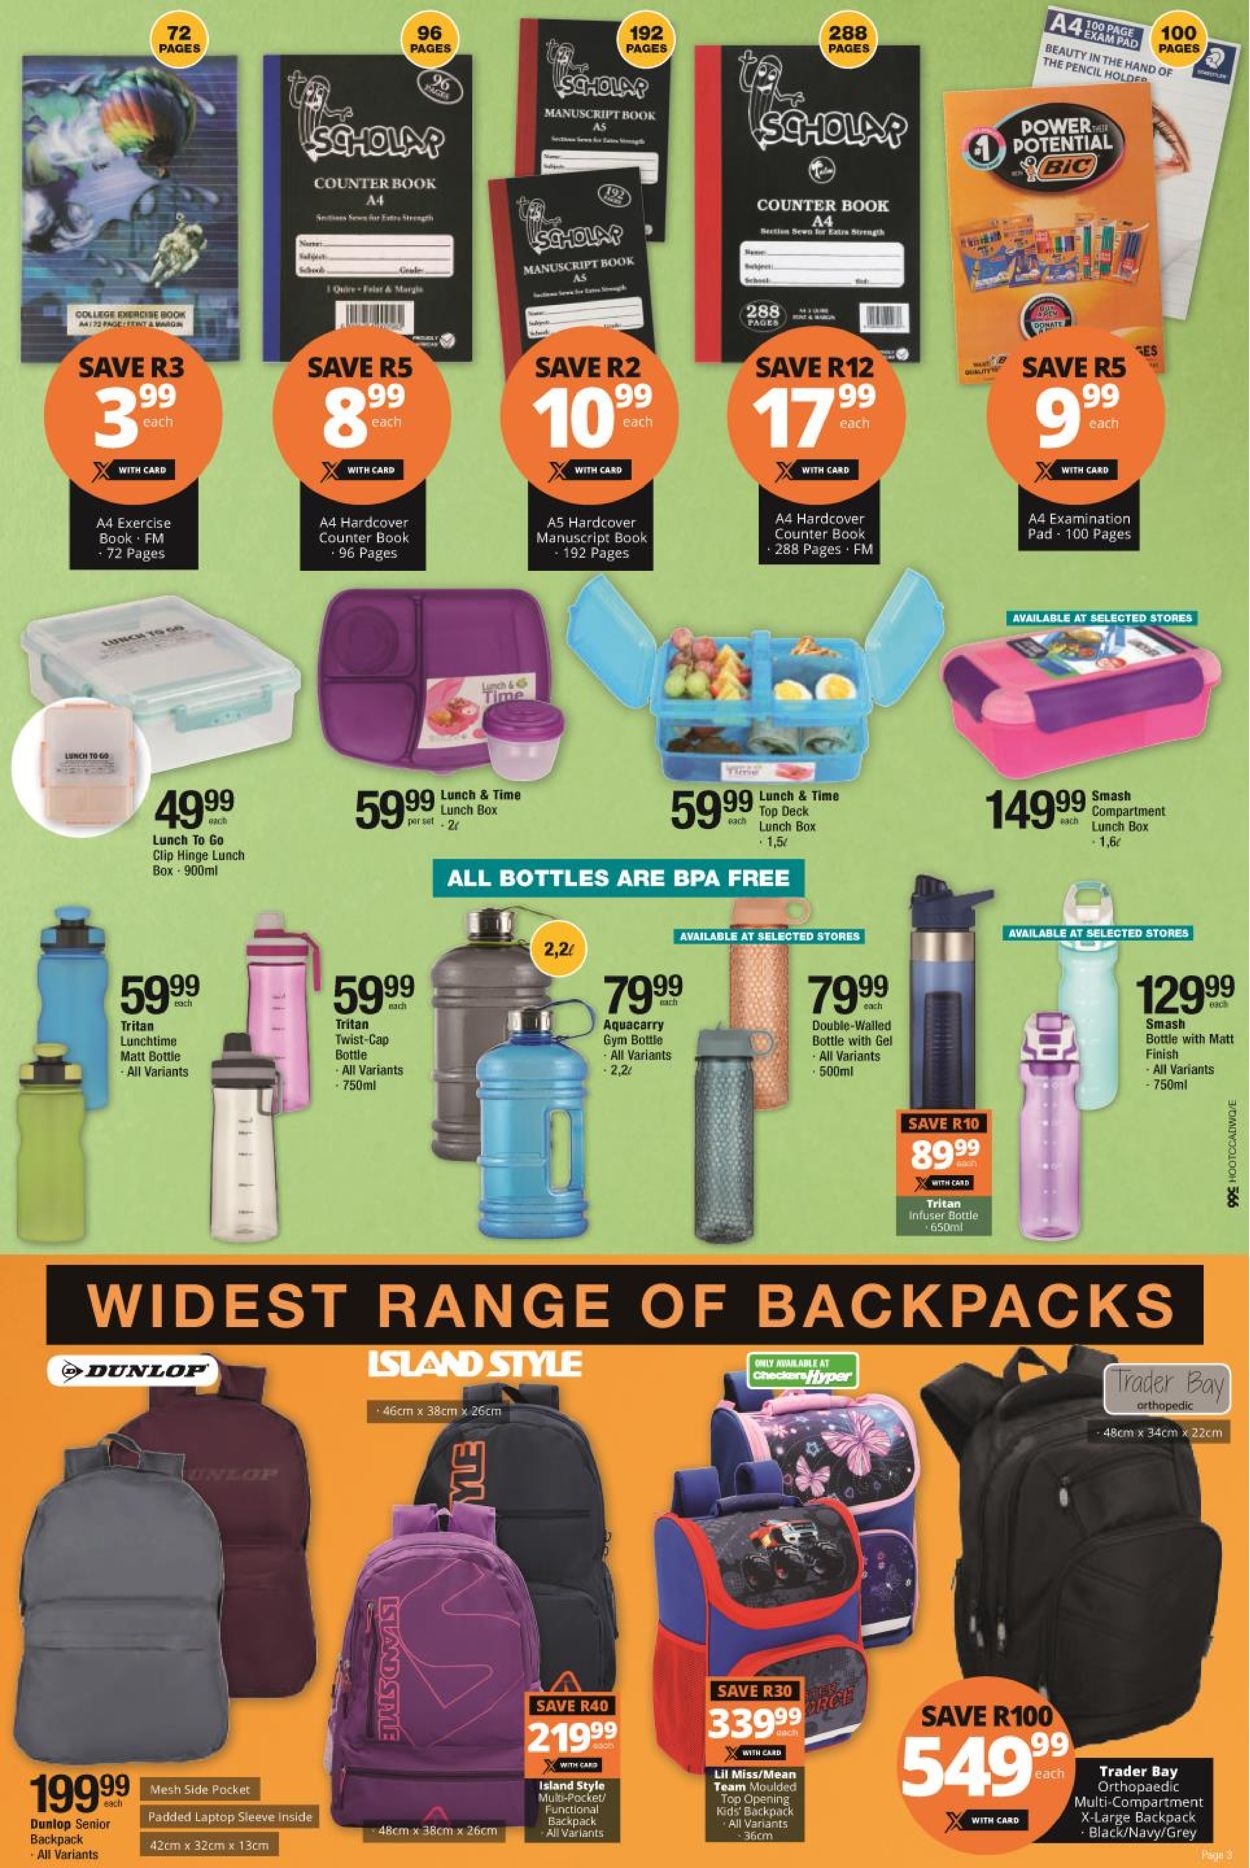 Checkers Back To School Savings 2021 Catalogue - 2021/01/18-2021/01/24 (Page 3)